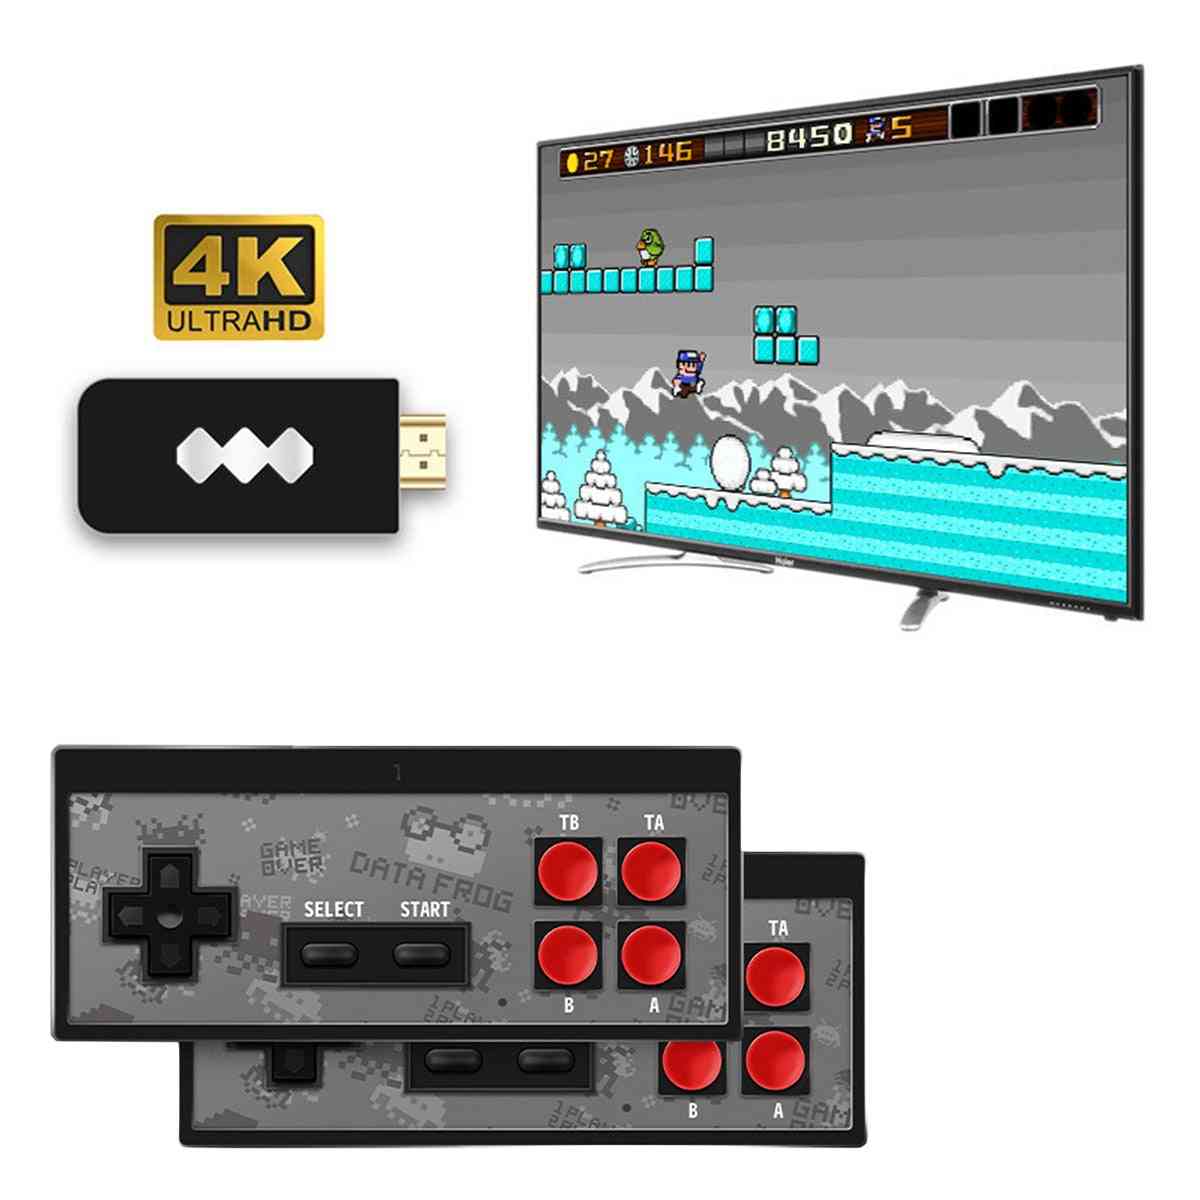 Date usb wireless handheld tv video game console support